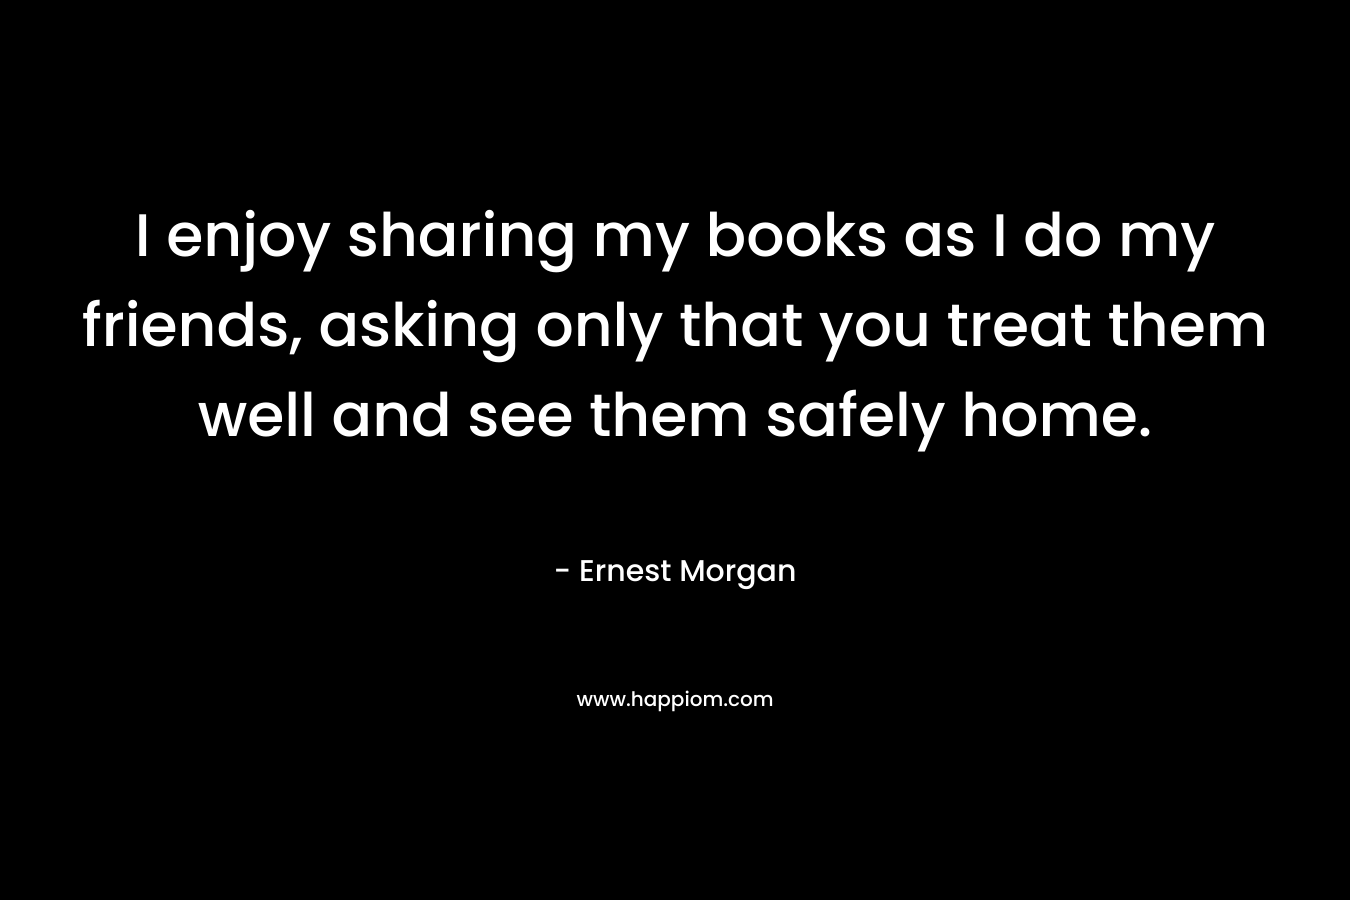 I enjoy sharing my books as I do my friends, asking only that you treat them well and see them safely home.